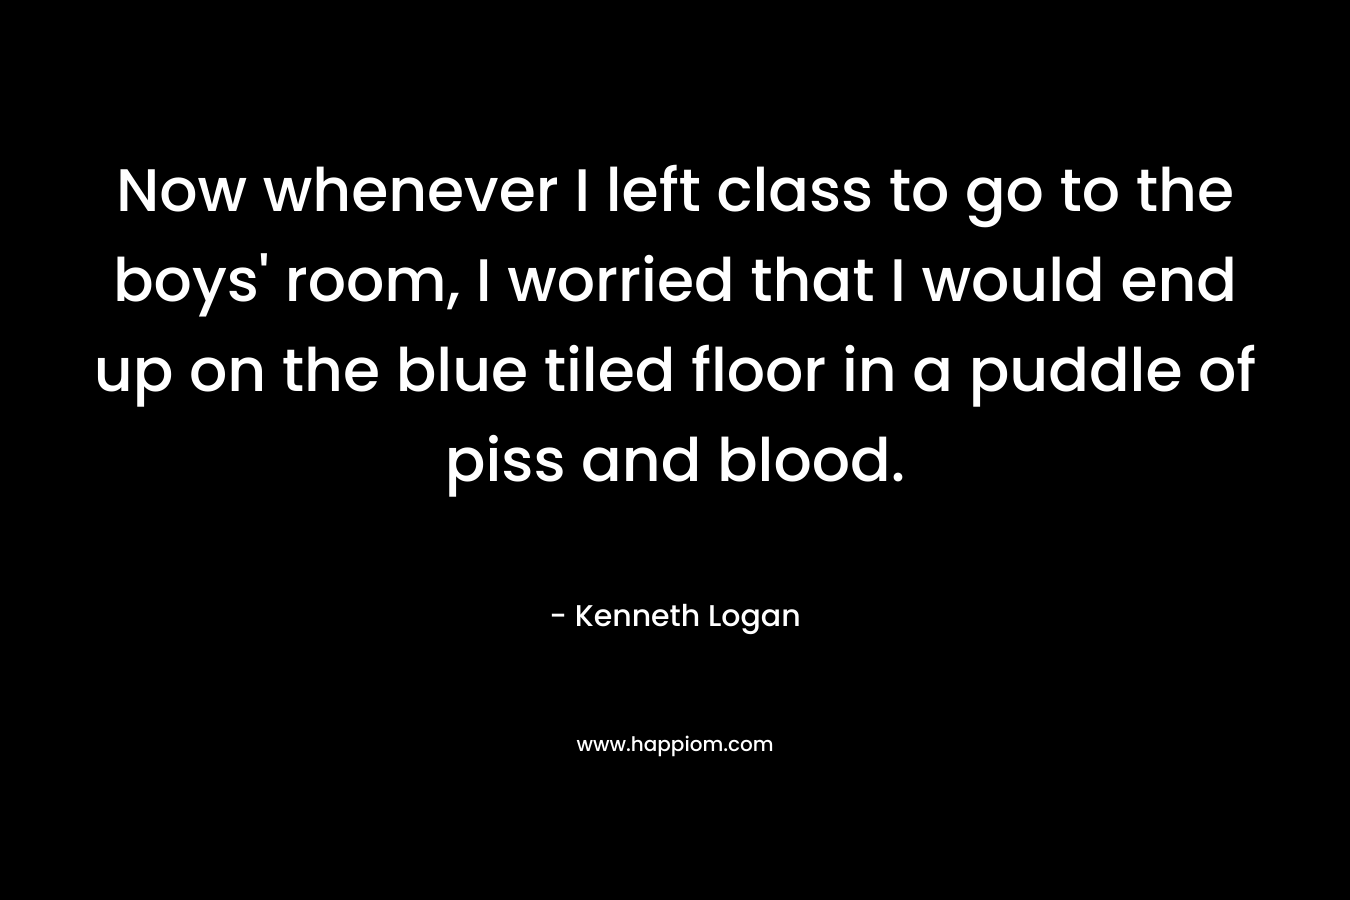 Now whenever I left class to go to the boys’ room, I worried that I would end up on the blue tiled floor in a puddle of piss and blood. – Kenneth Logan